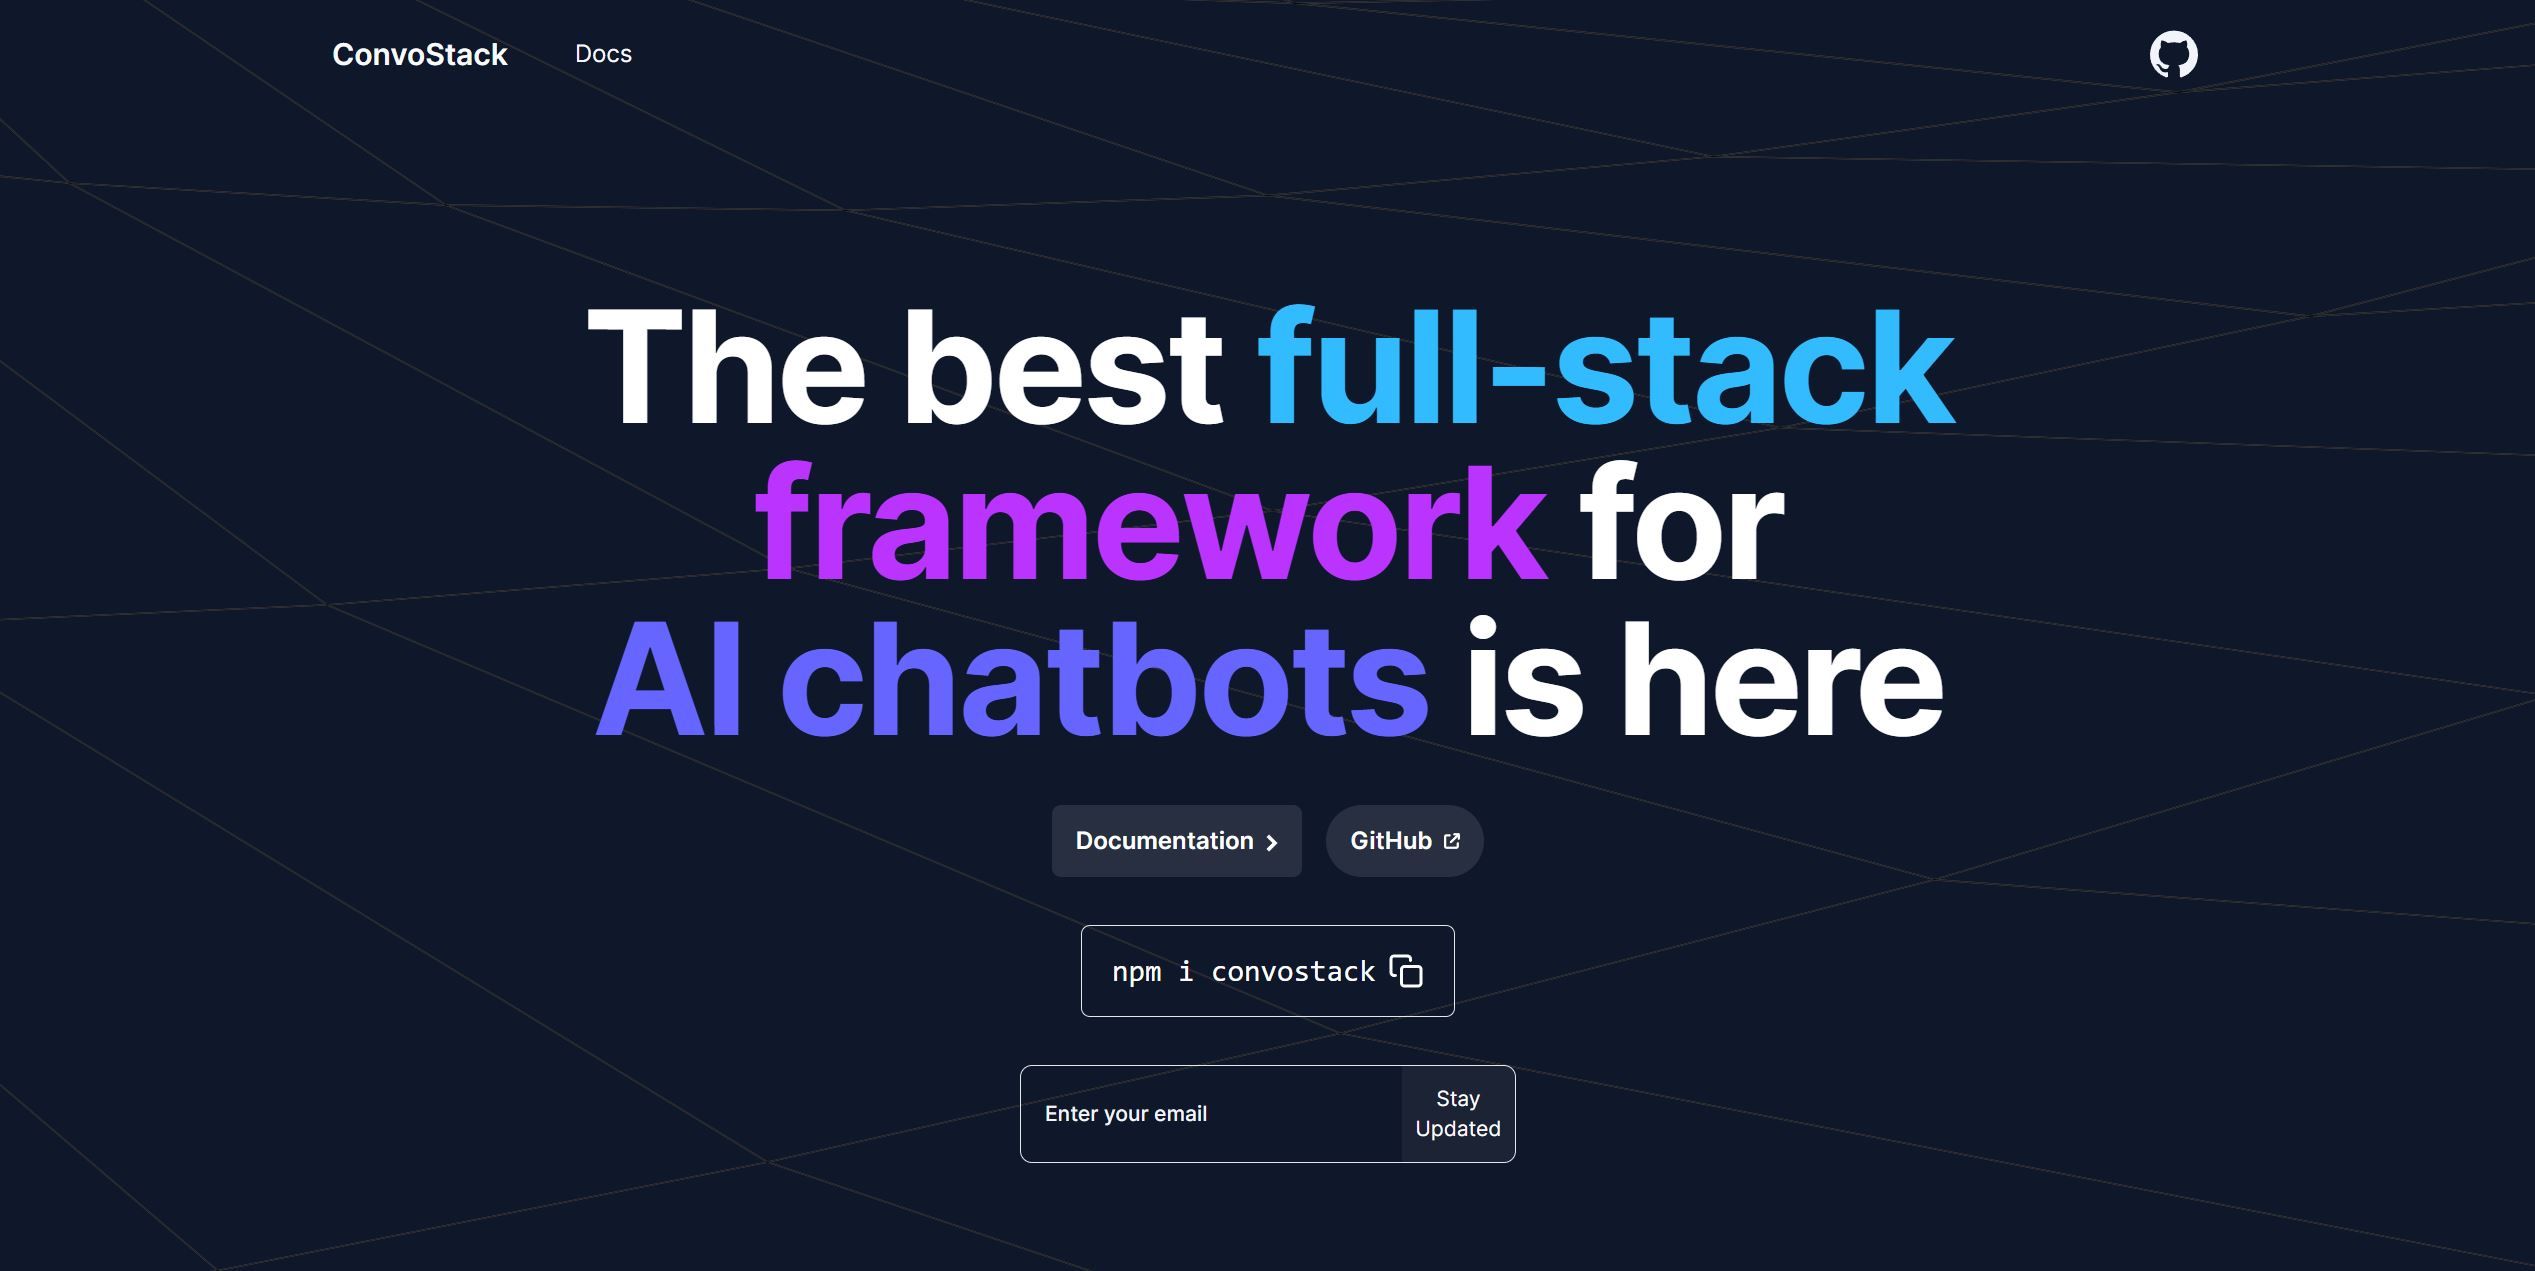  The best full-stack framework for AI chatbots is